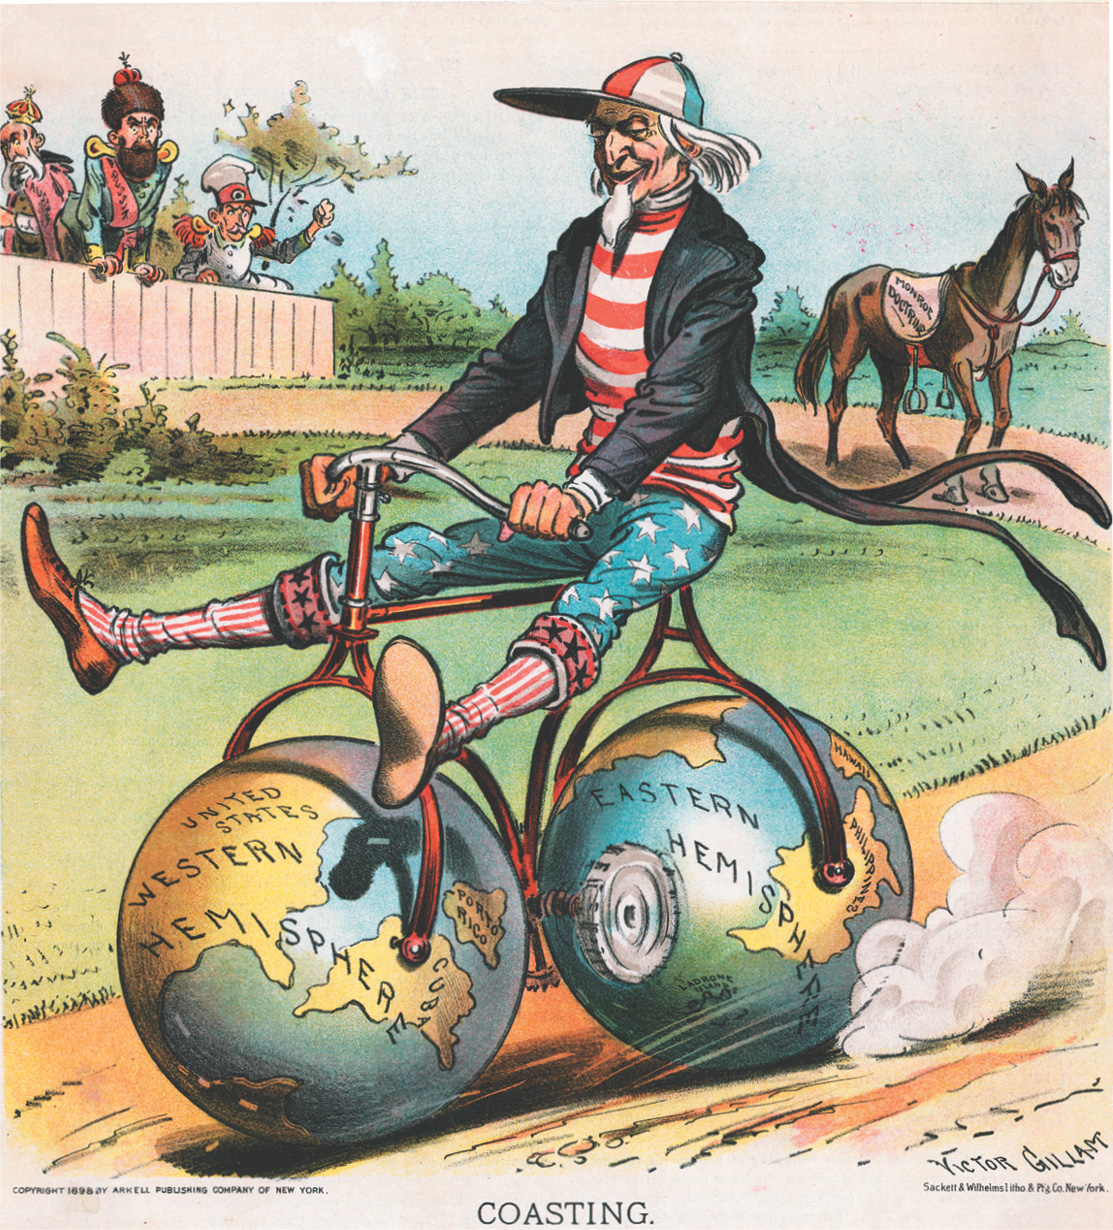 Cartoon: Uncle Sam rides a bicycle with globes for wheels.  Caption: Coasting.